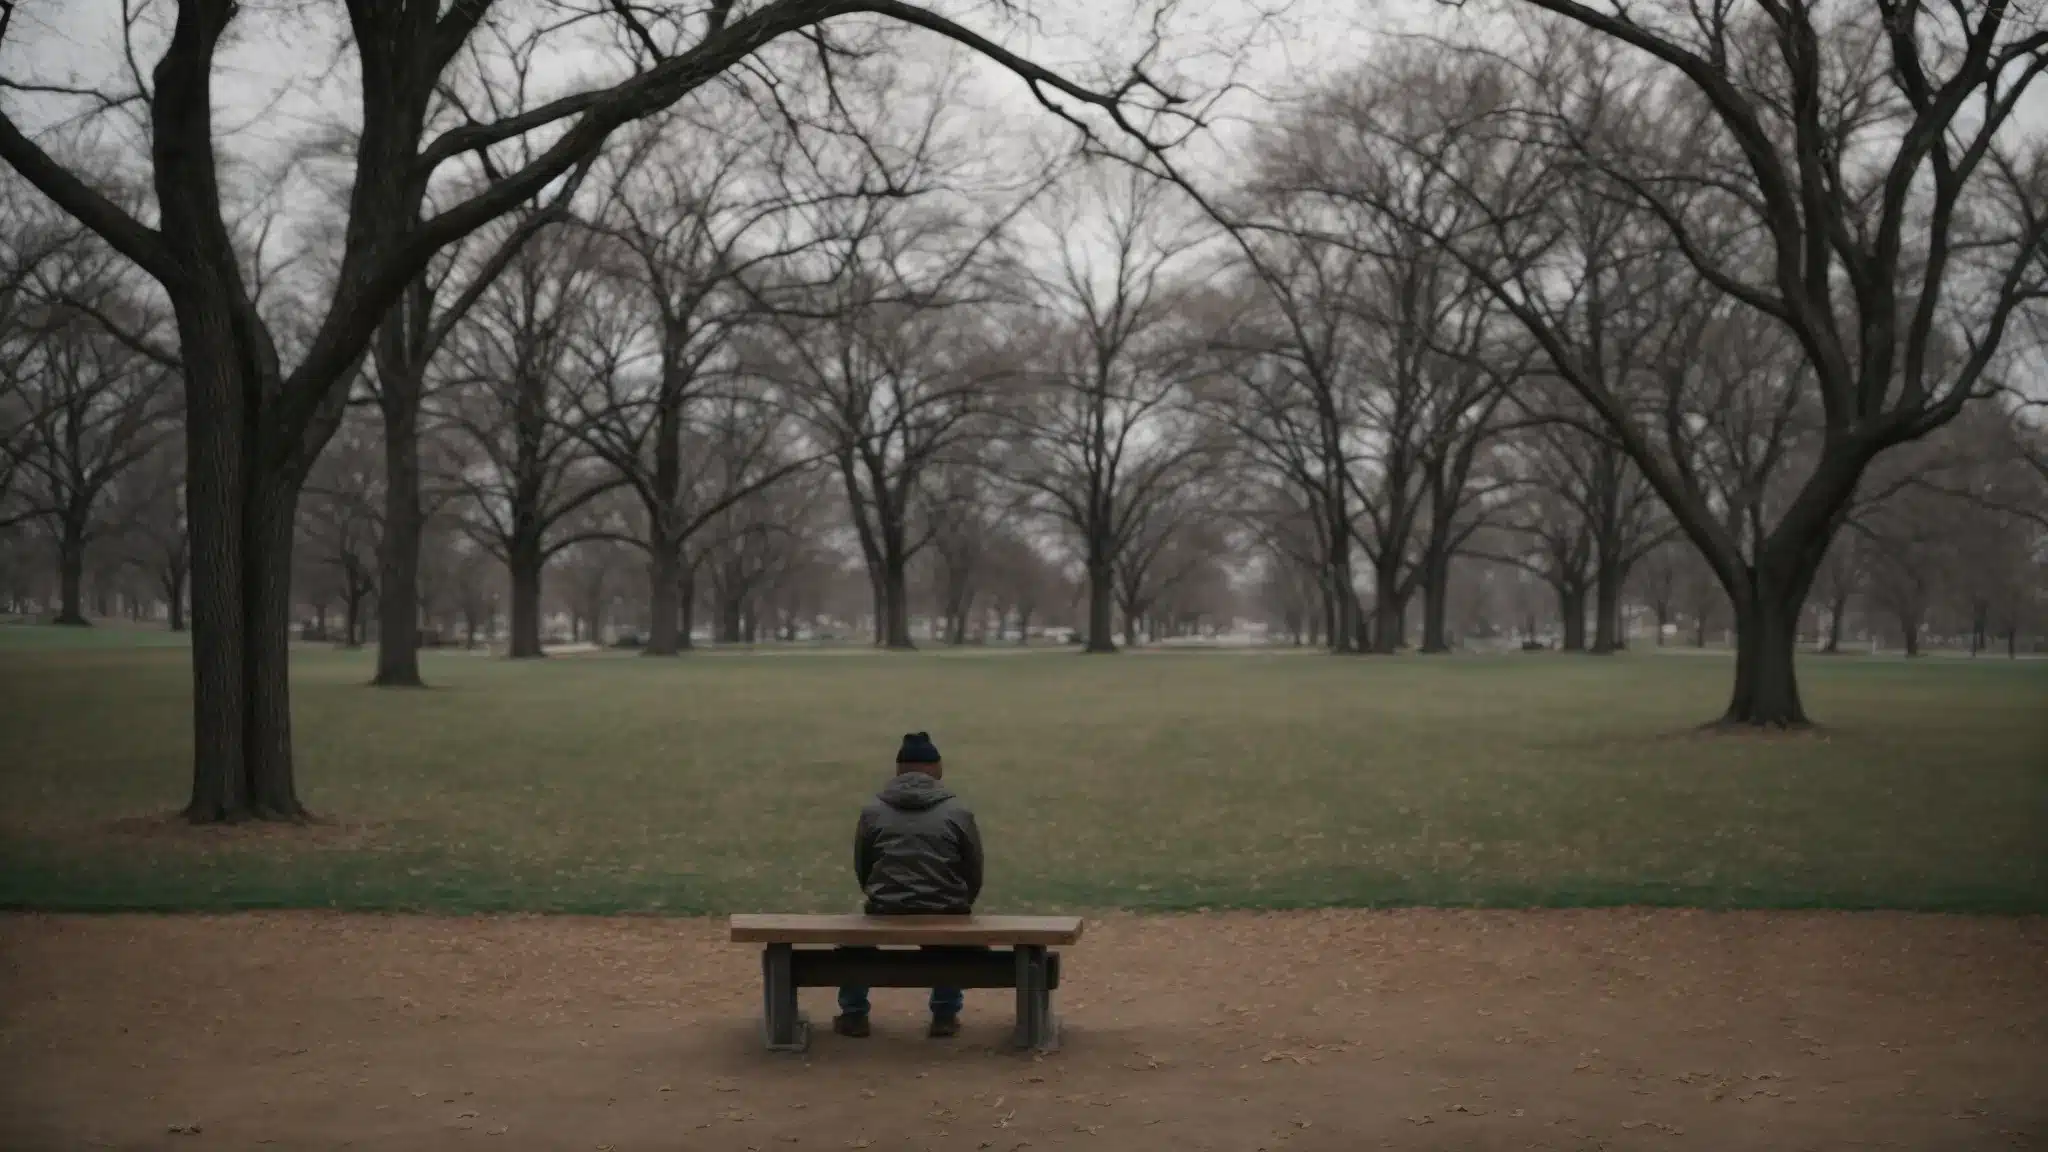 a person sitting alone on a bench in a bare, leafless park in washington d.c. during a gray, overcast winter day.